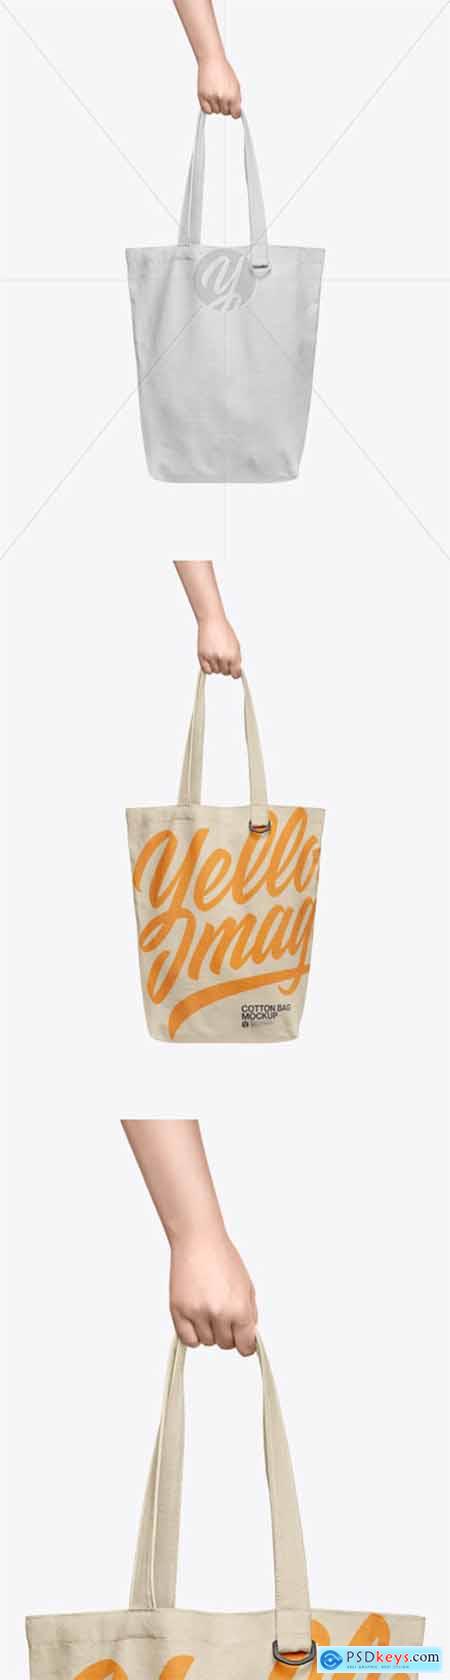 Cotton Bag in a Hand Mockup 56802